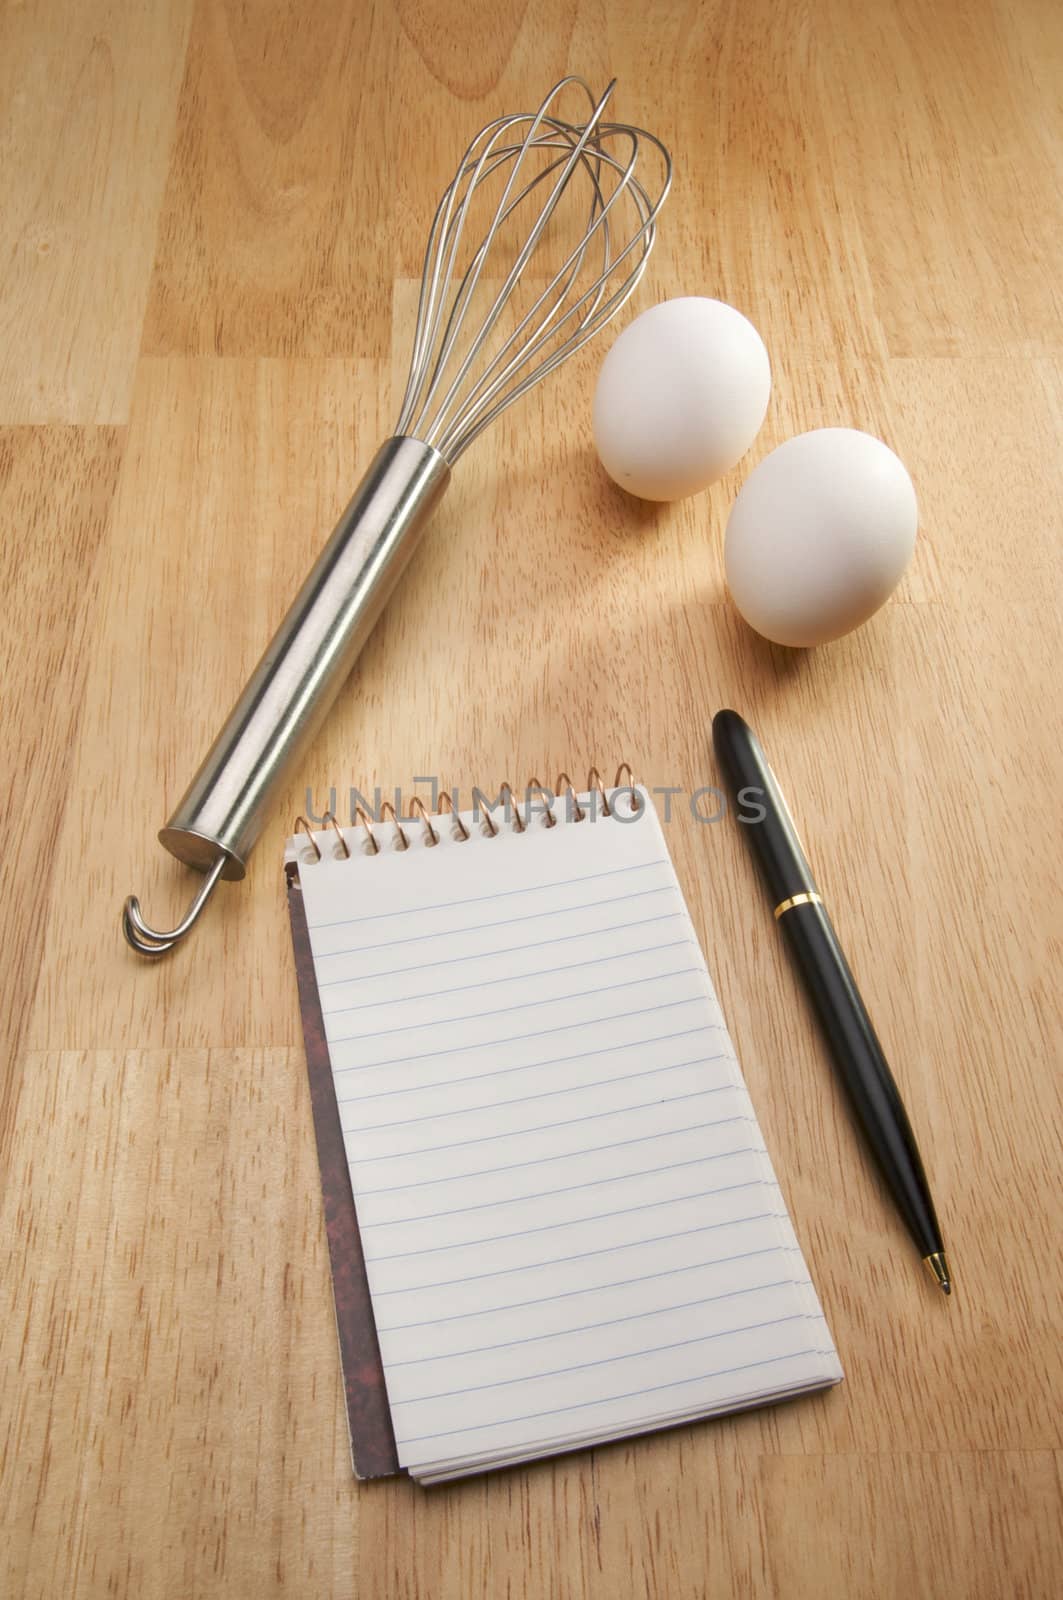 Mixer, Eggs, Pen and Pad of Paper by Feverpitched